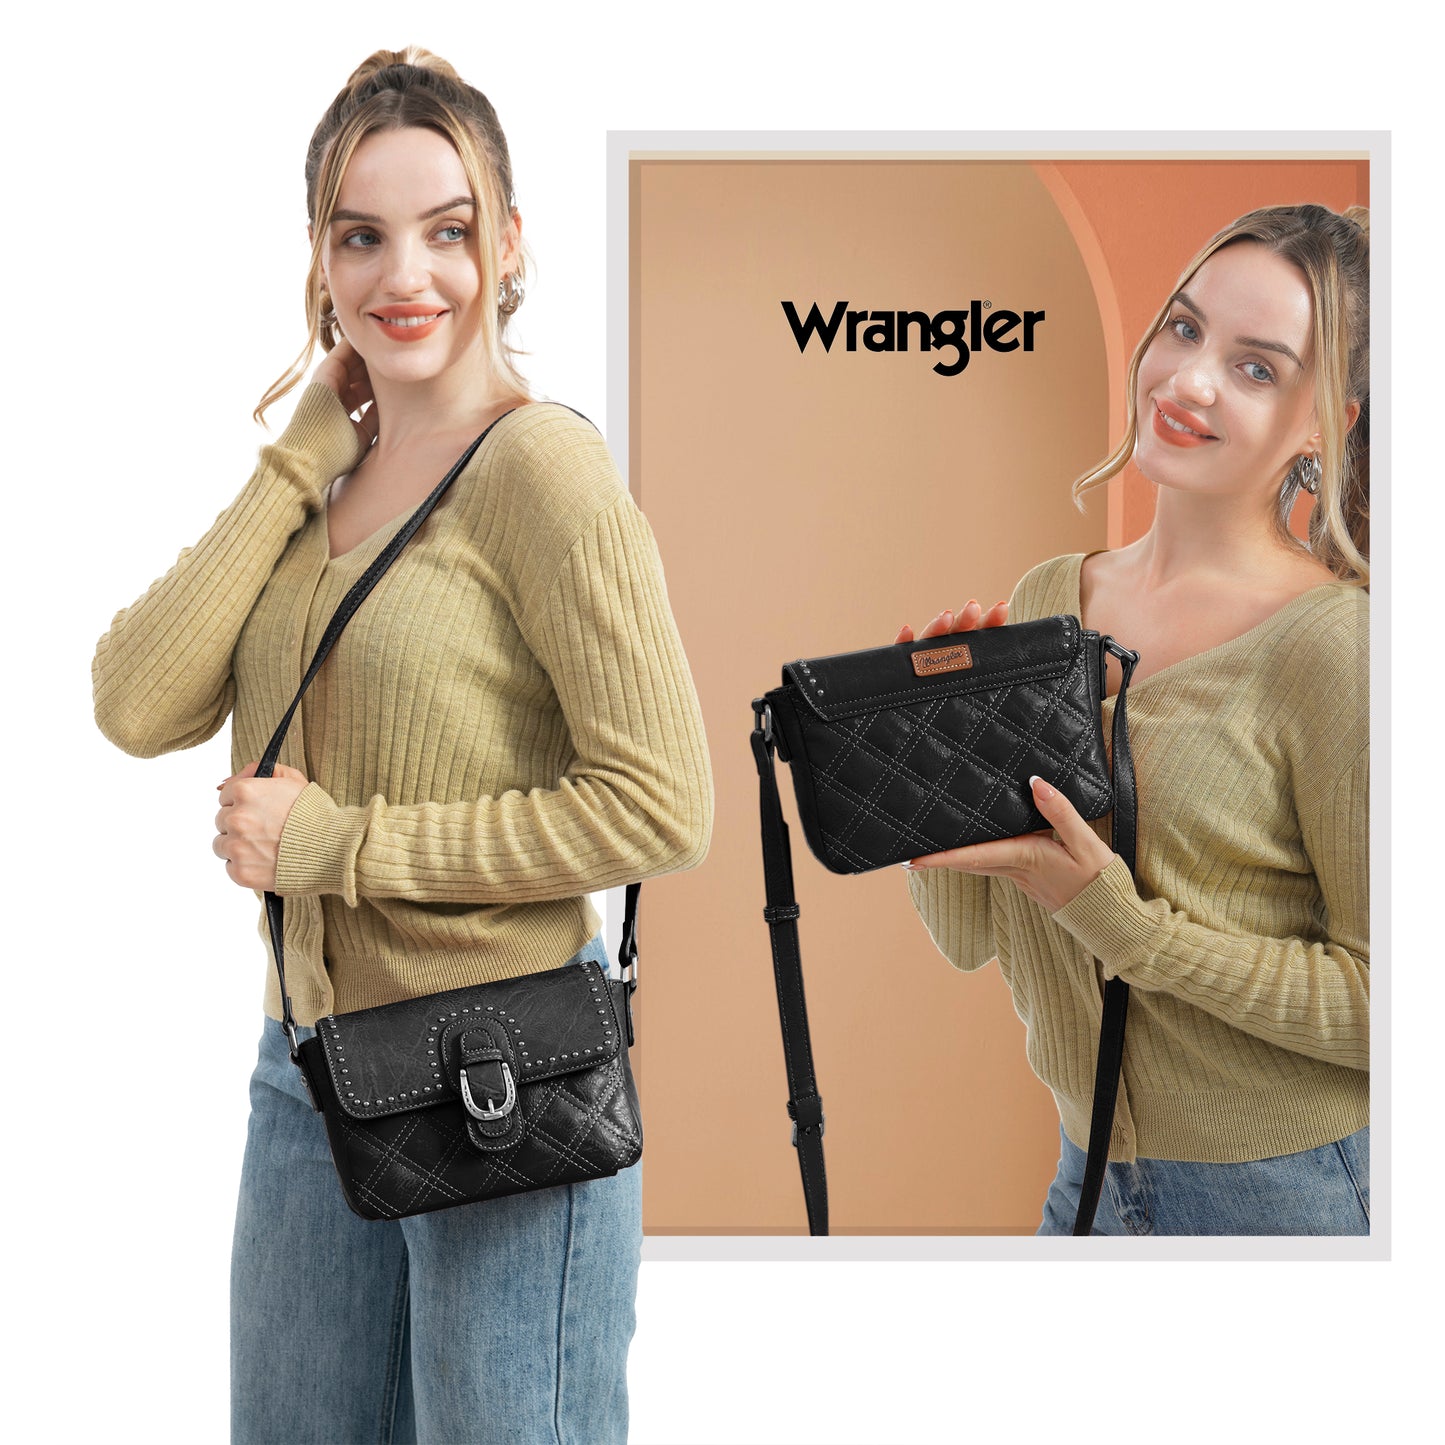 Wrangler Women's Buckle Crossbody Quilted PU Leather Shoulder Purse